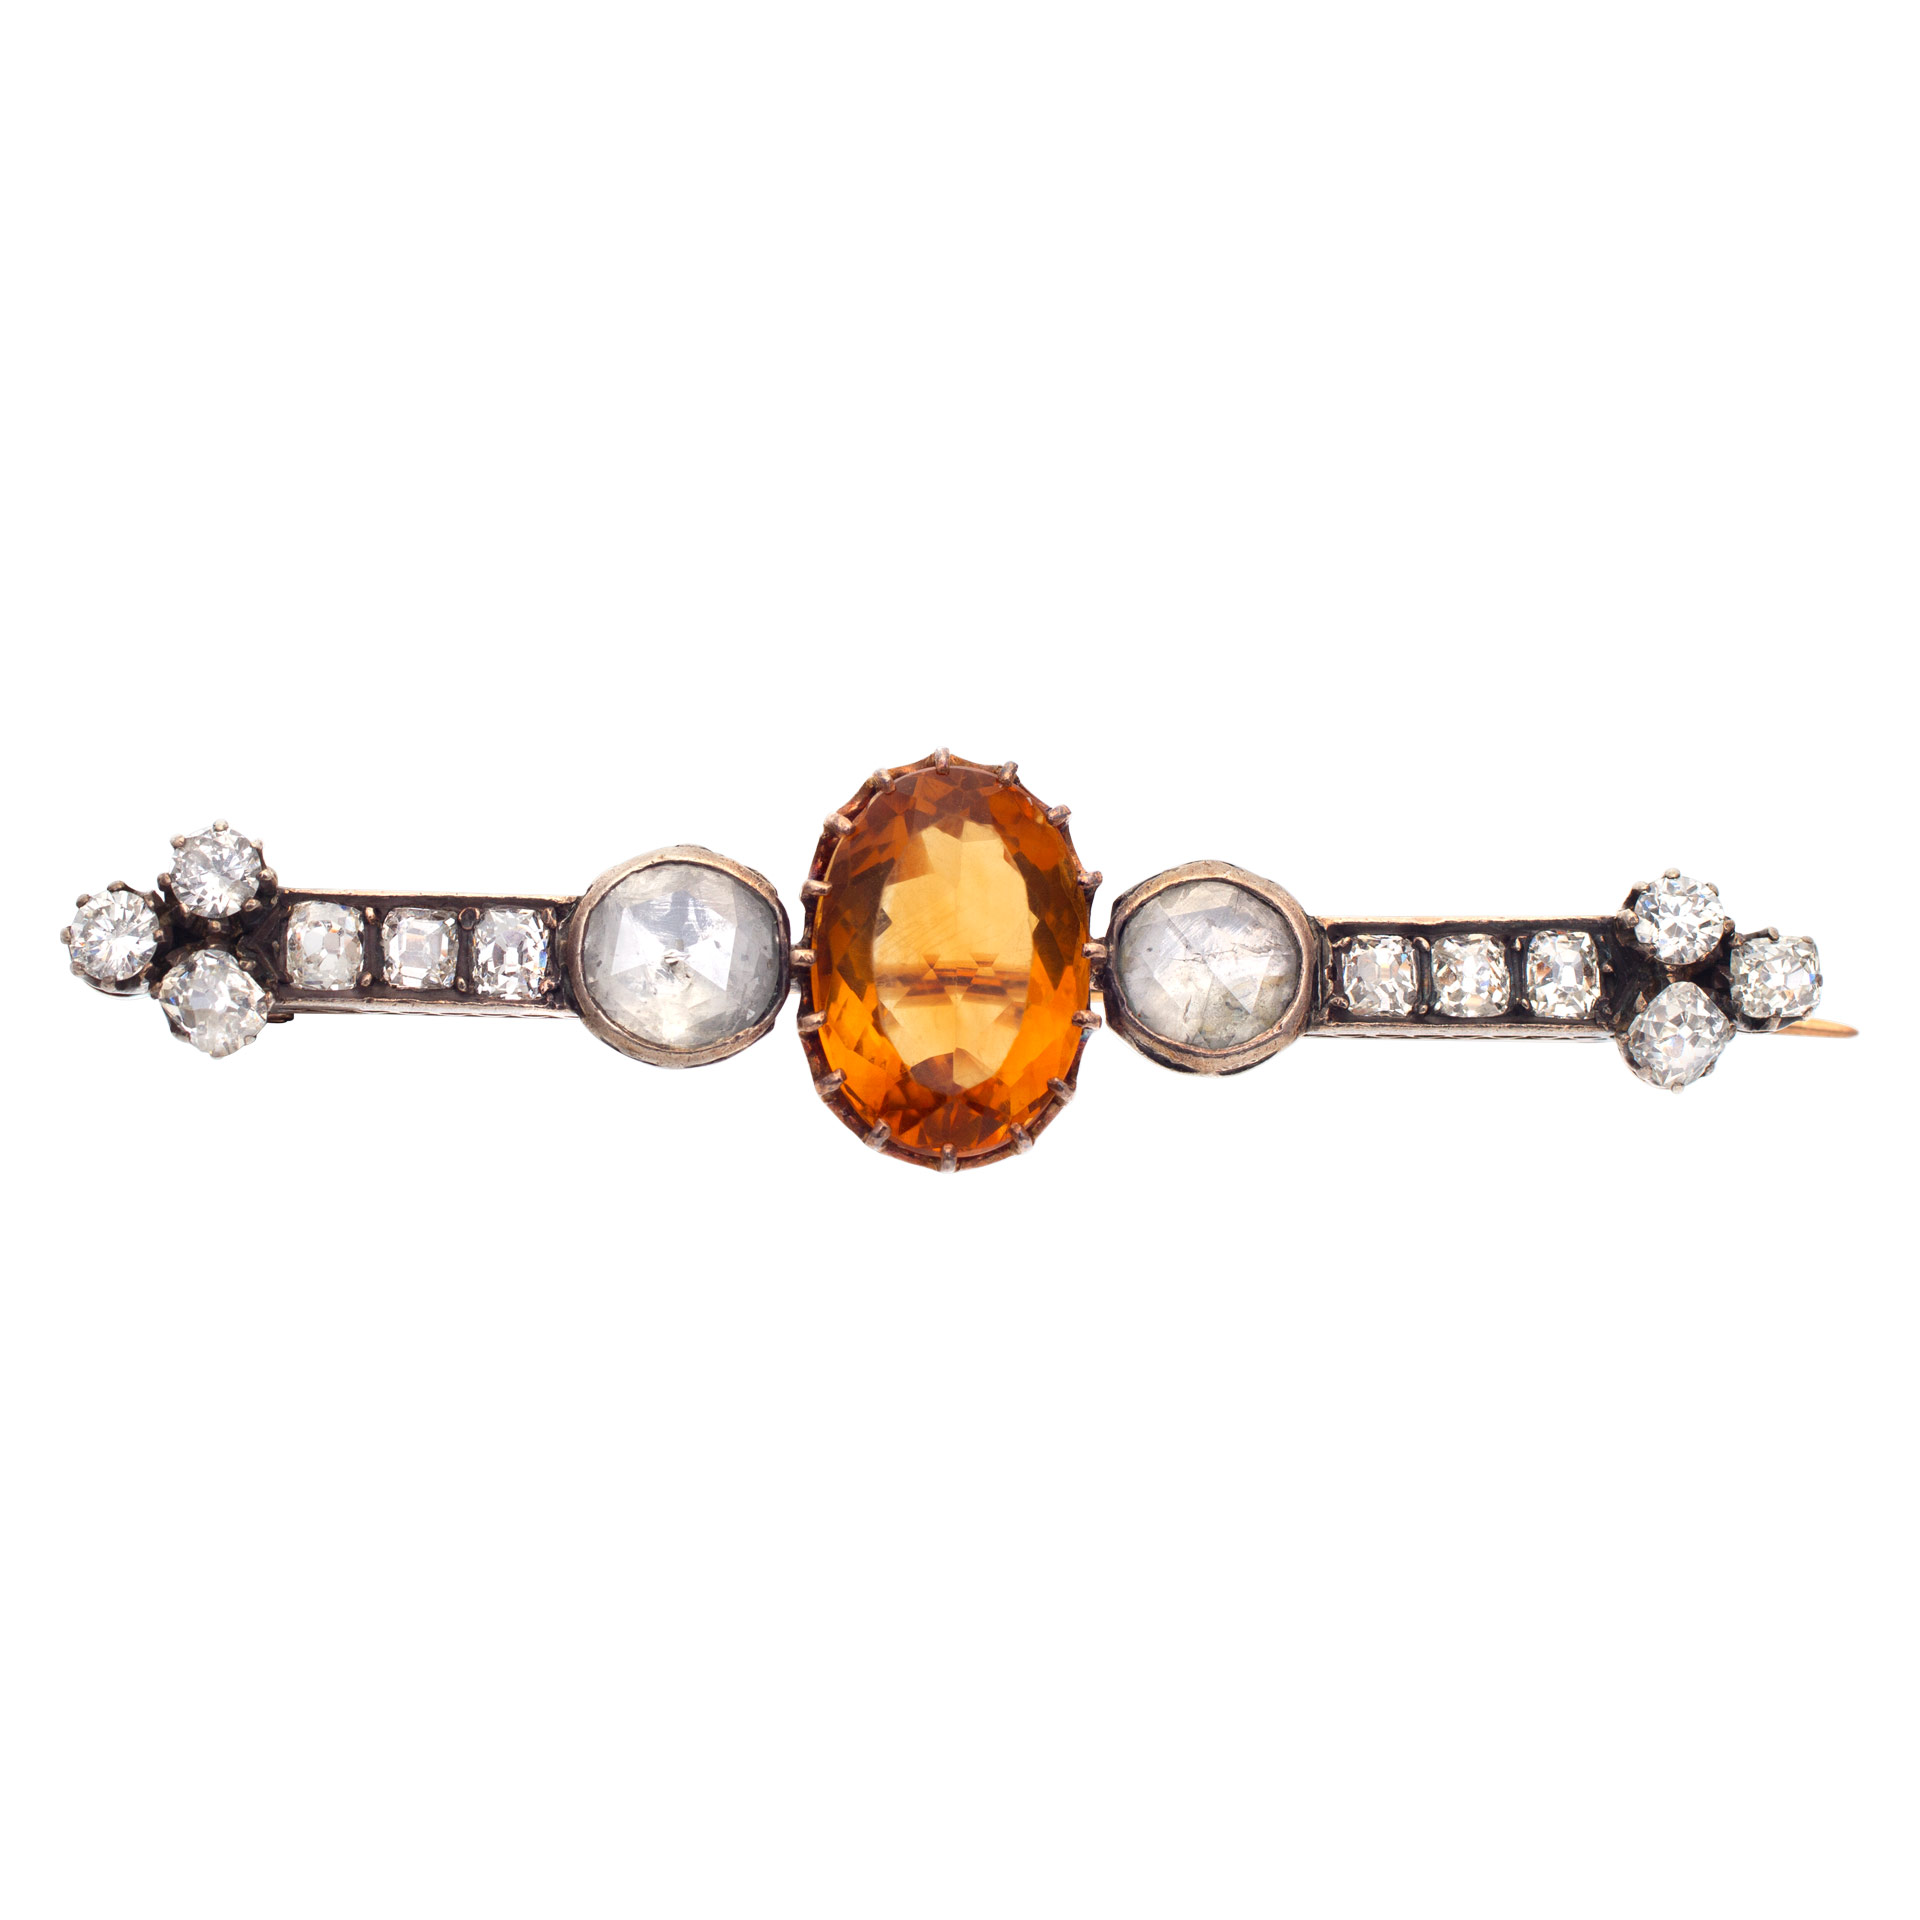 Antique (circa 1870) bar pin with rose, cushion cut diamonds and oval topaz center in 18K and sterling silver top. Over 2.00 carats diamonds.